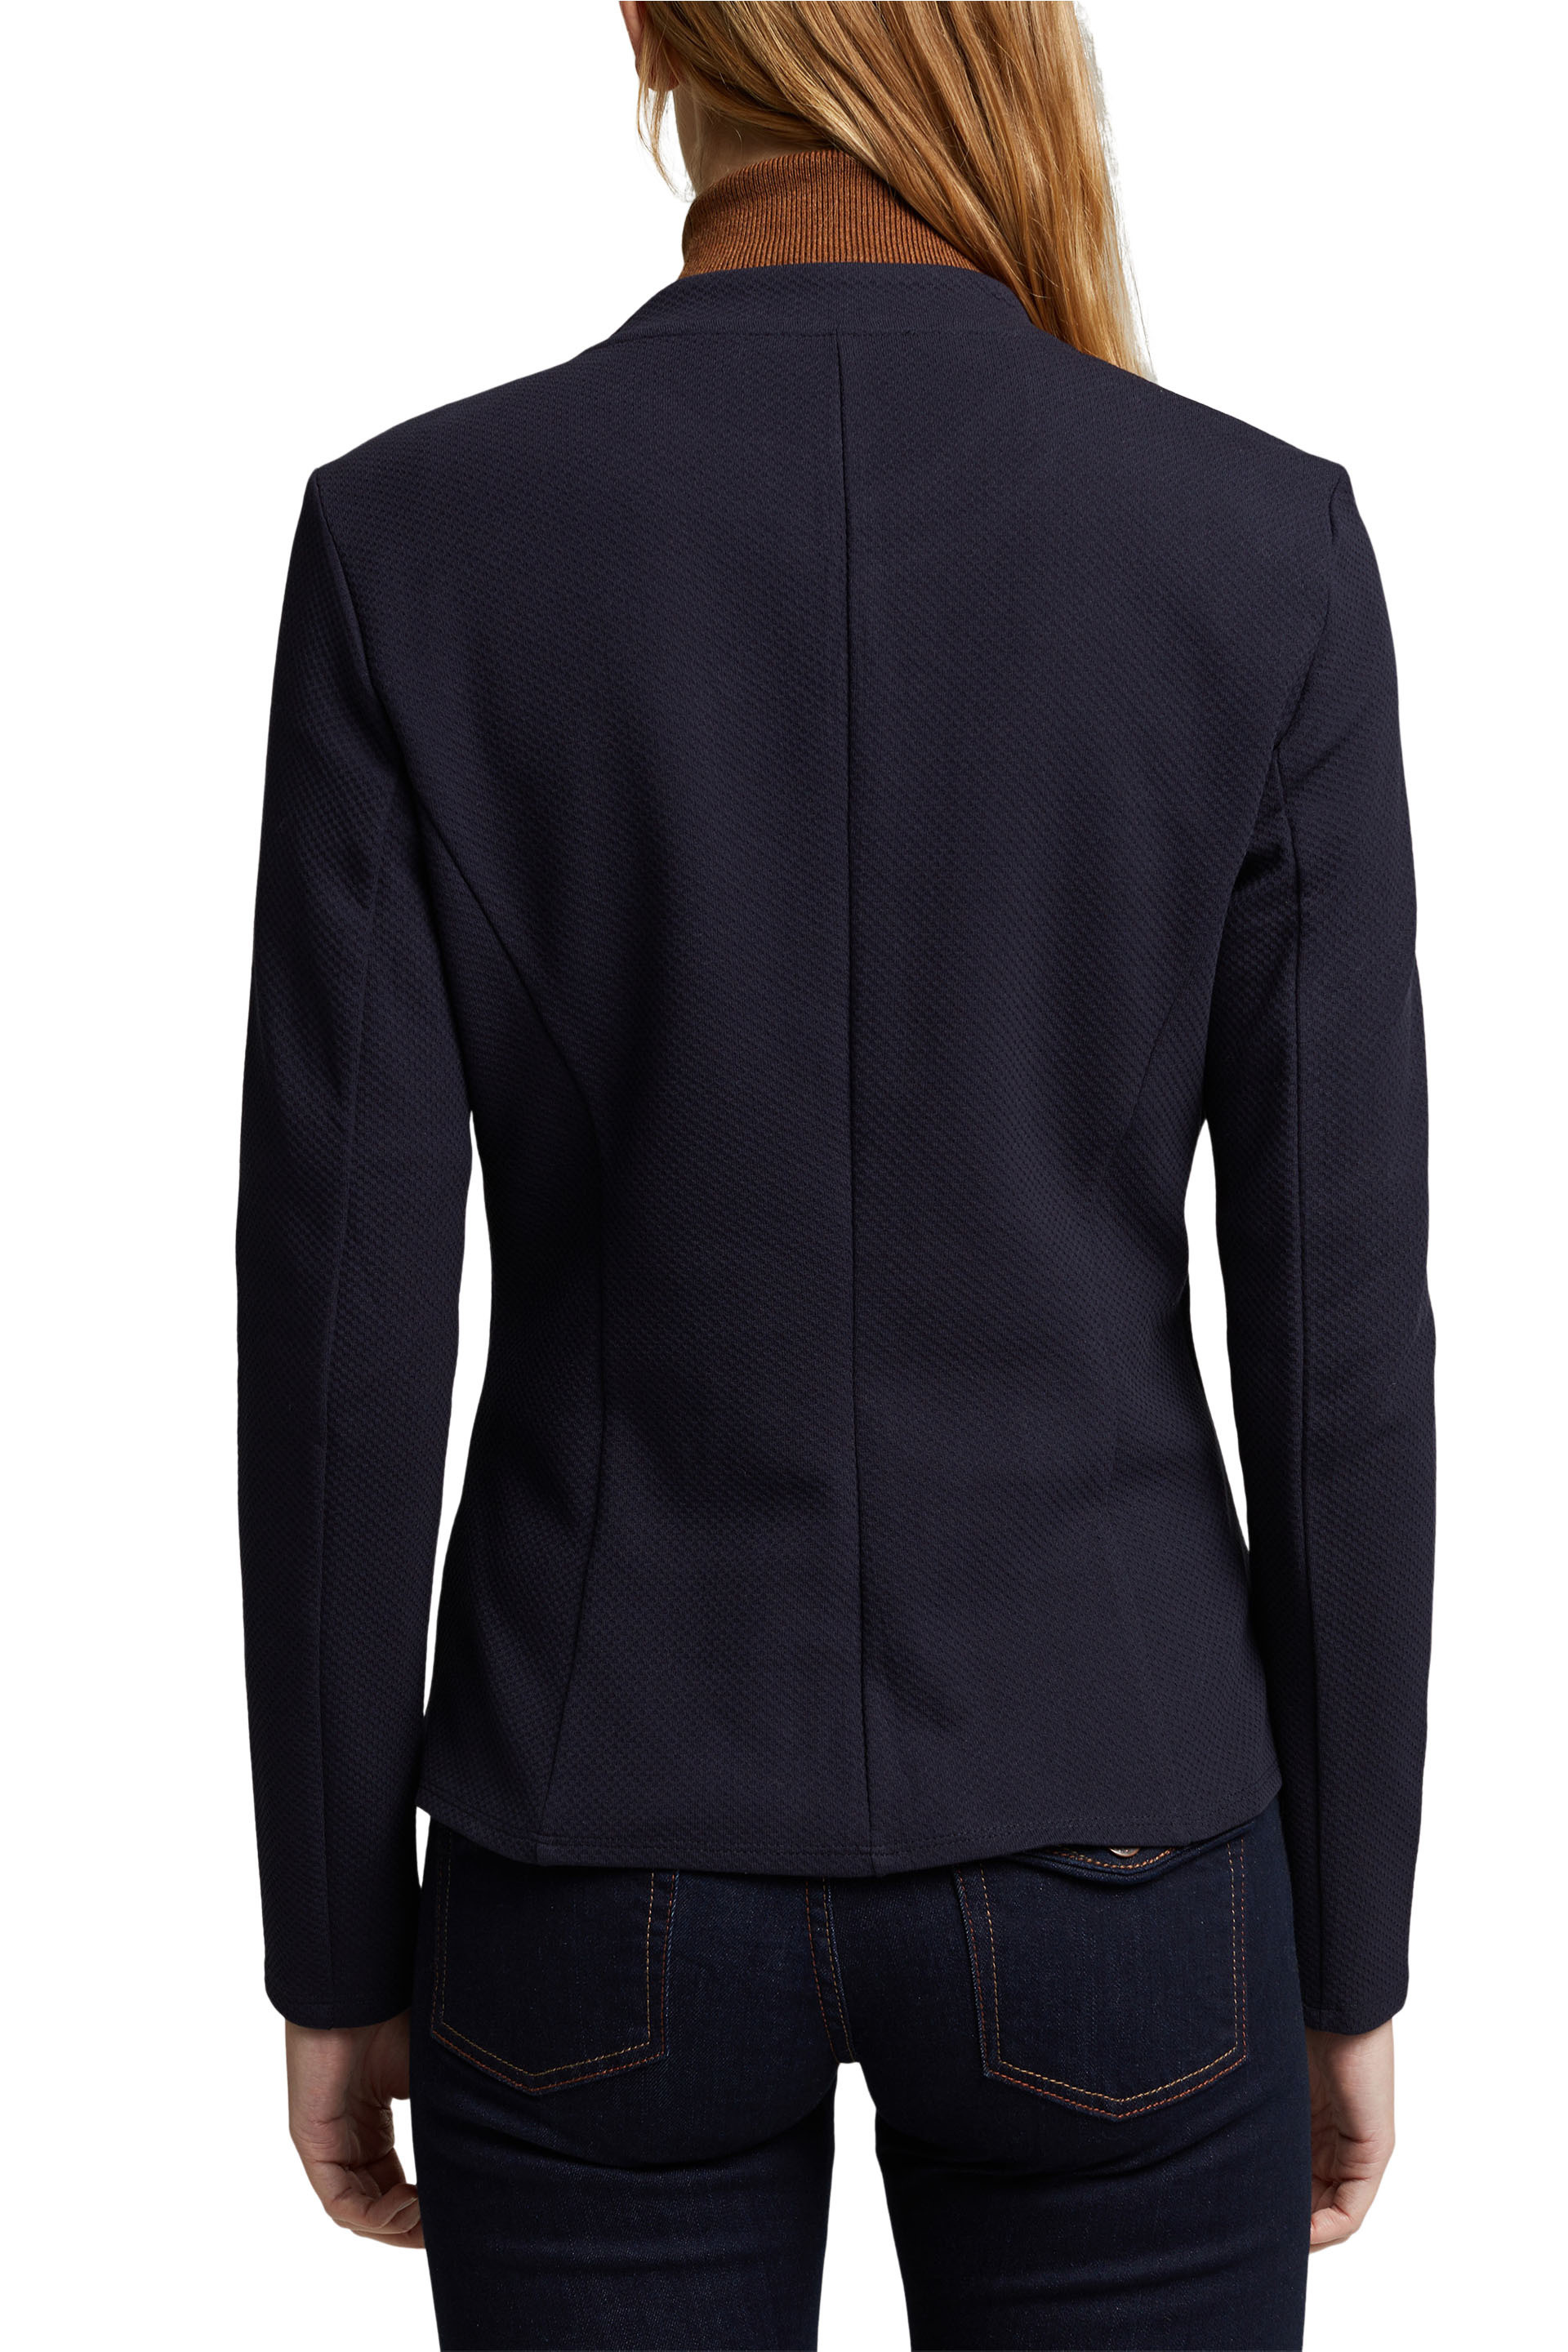 Blazer sciancrato in jersey, Blu, large image number 2